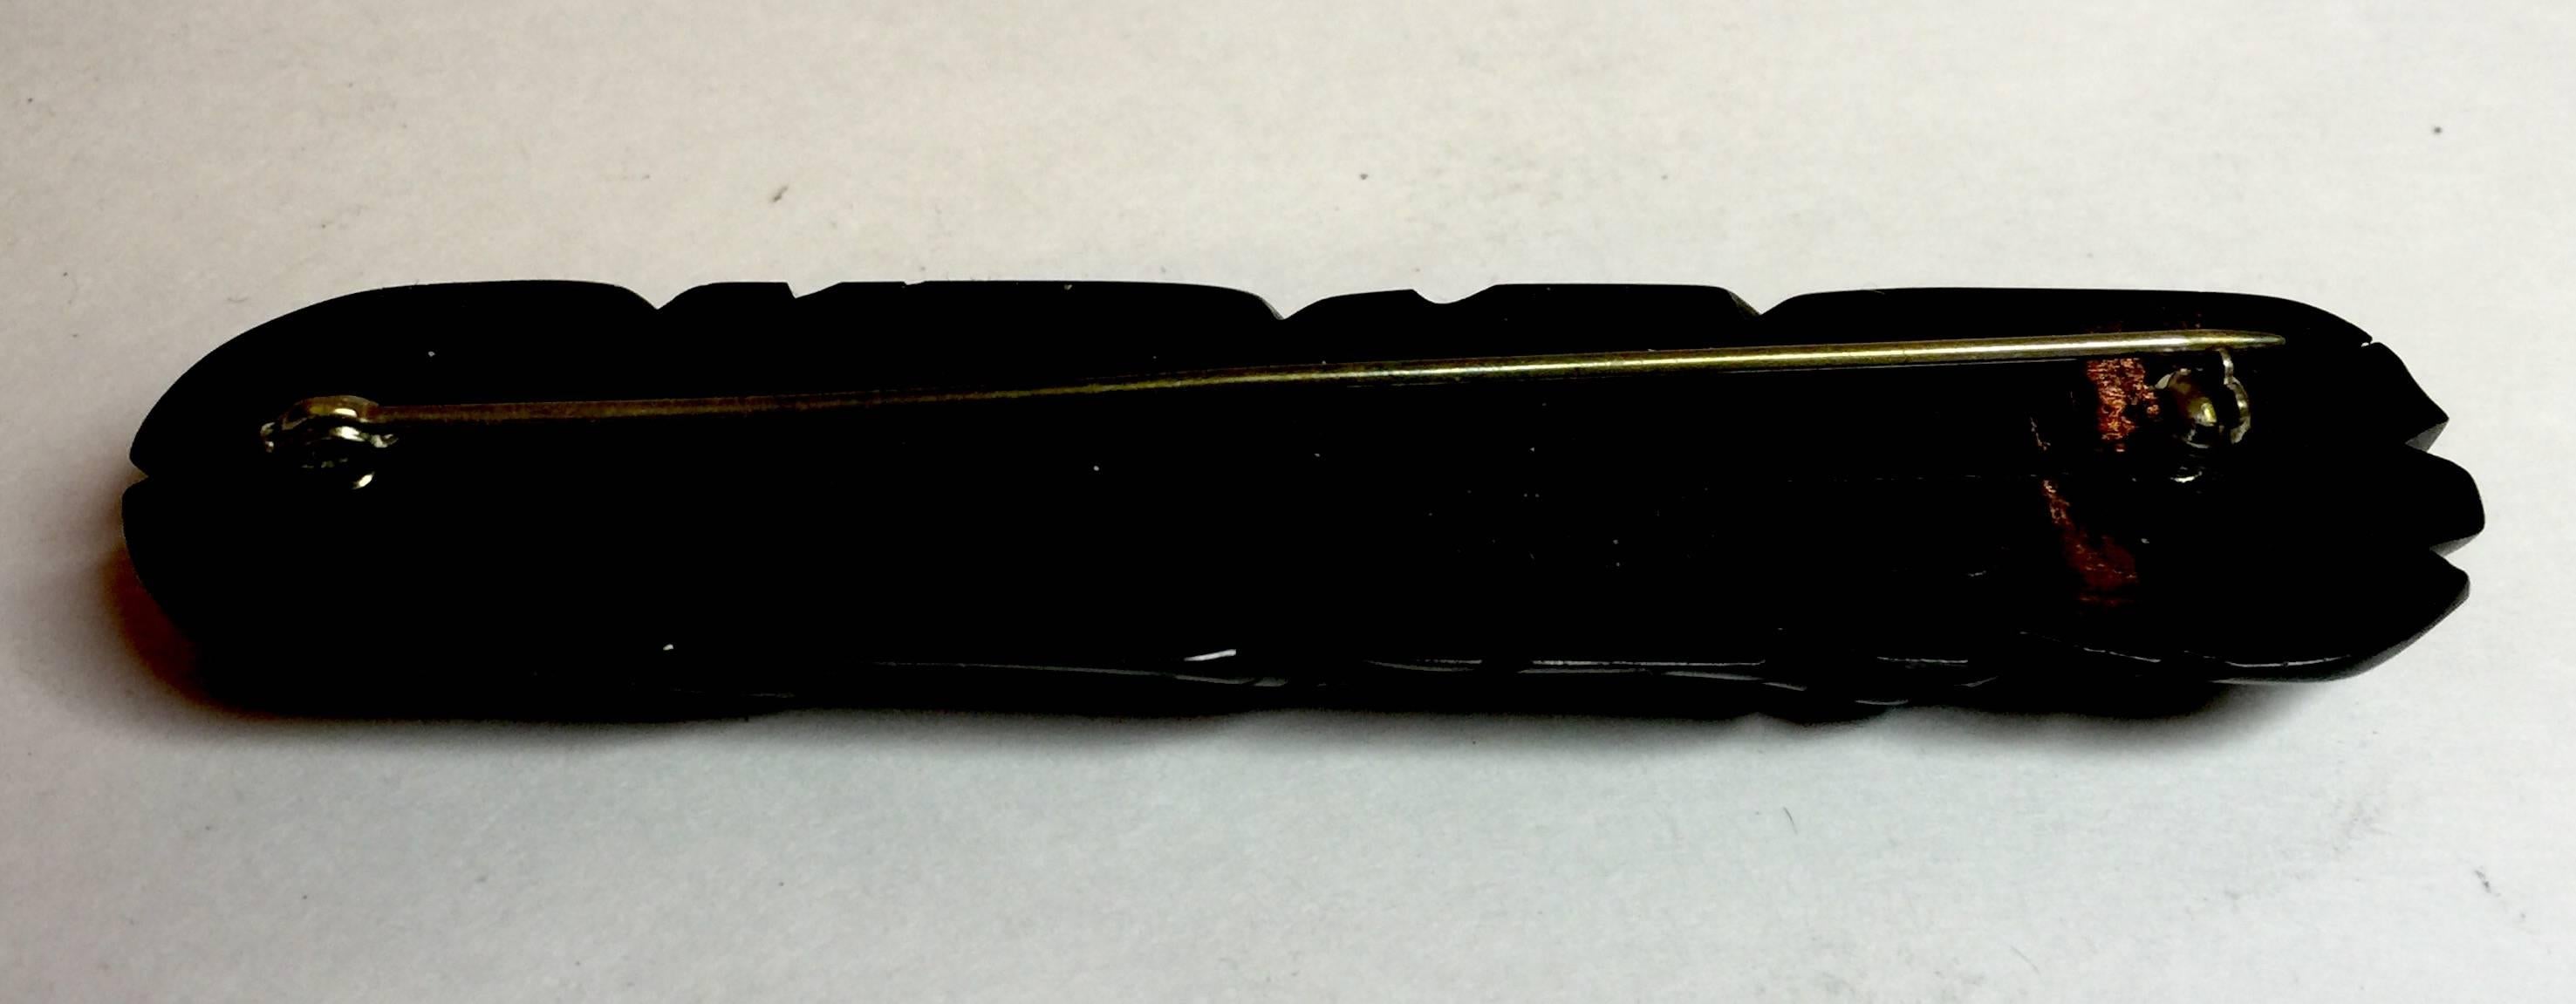 This 1930s Art Deco Black Bakelite Heavily Carved Bar Pin has LEAVES carved into it in horizontal rows. The carving detail is sharp and quite sculptural. This classic design emulates similar Victorian designs in jet from earlier eras. Its